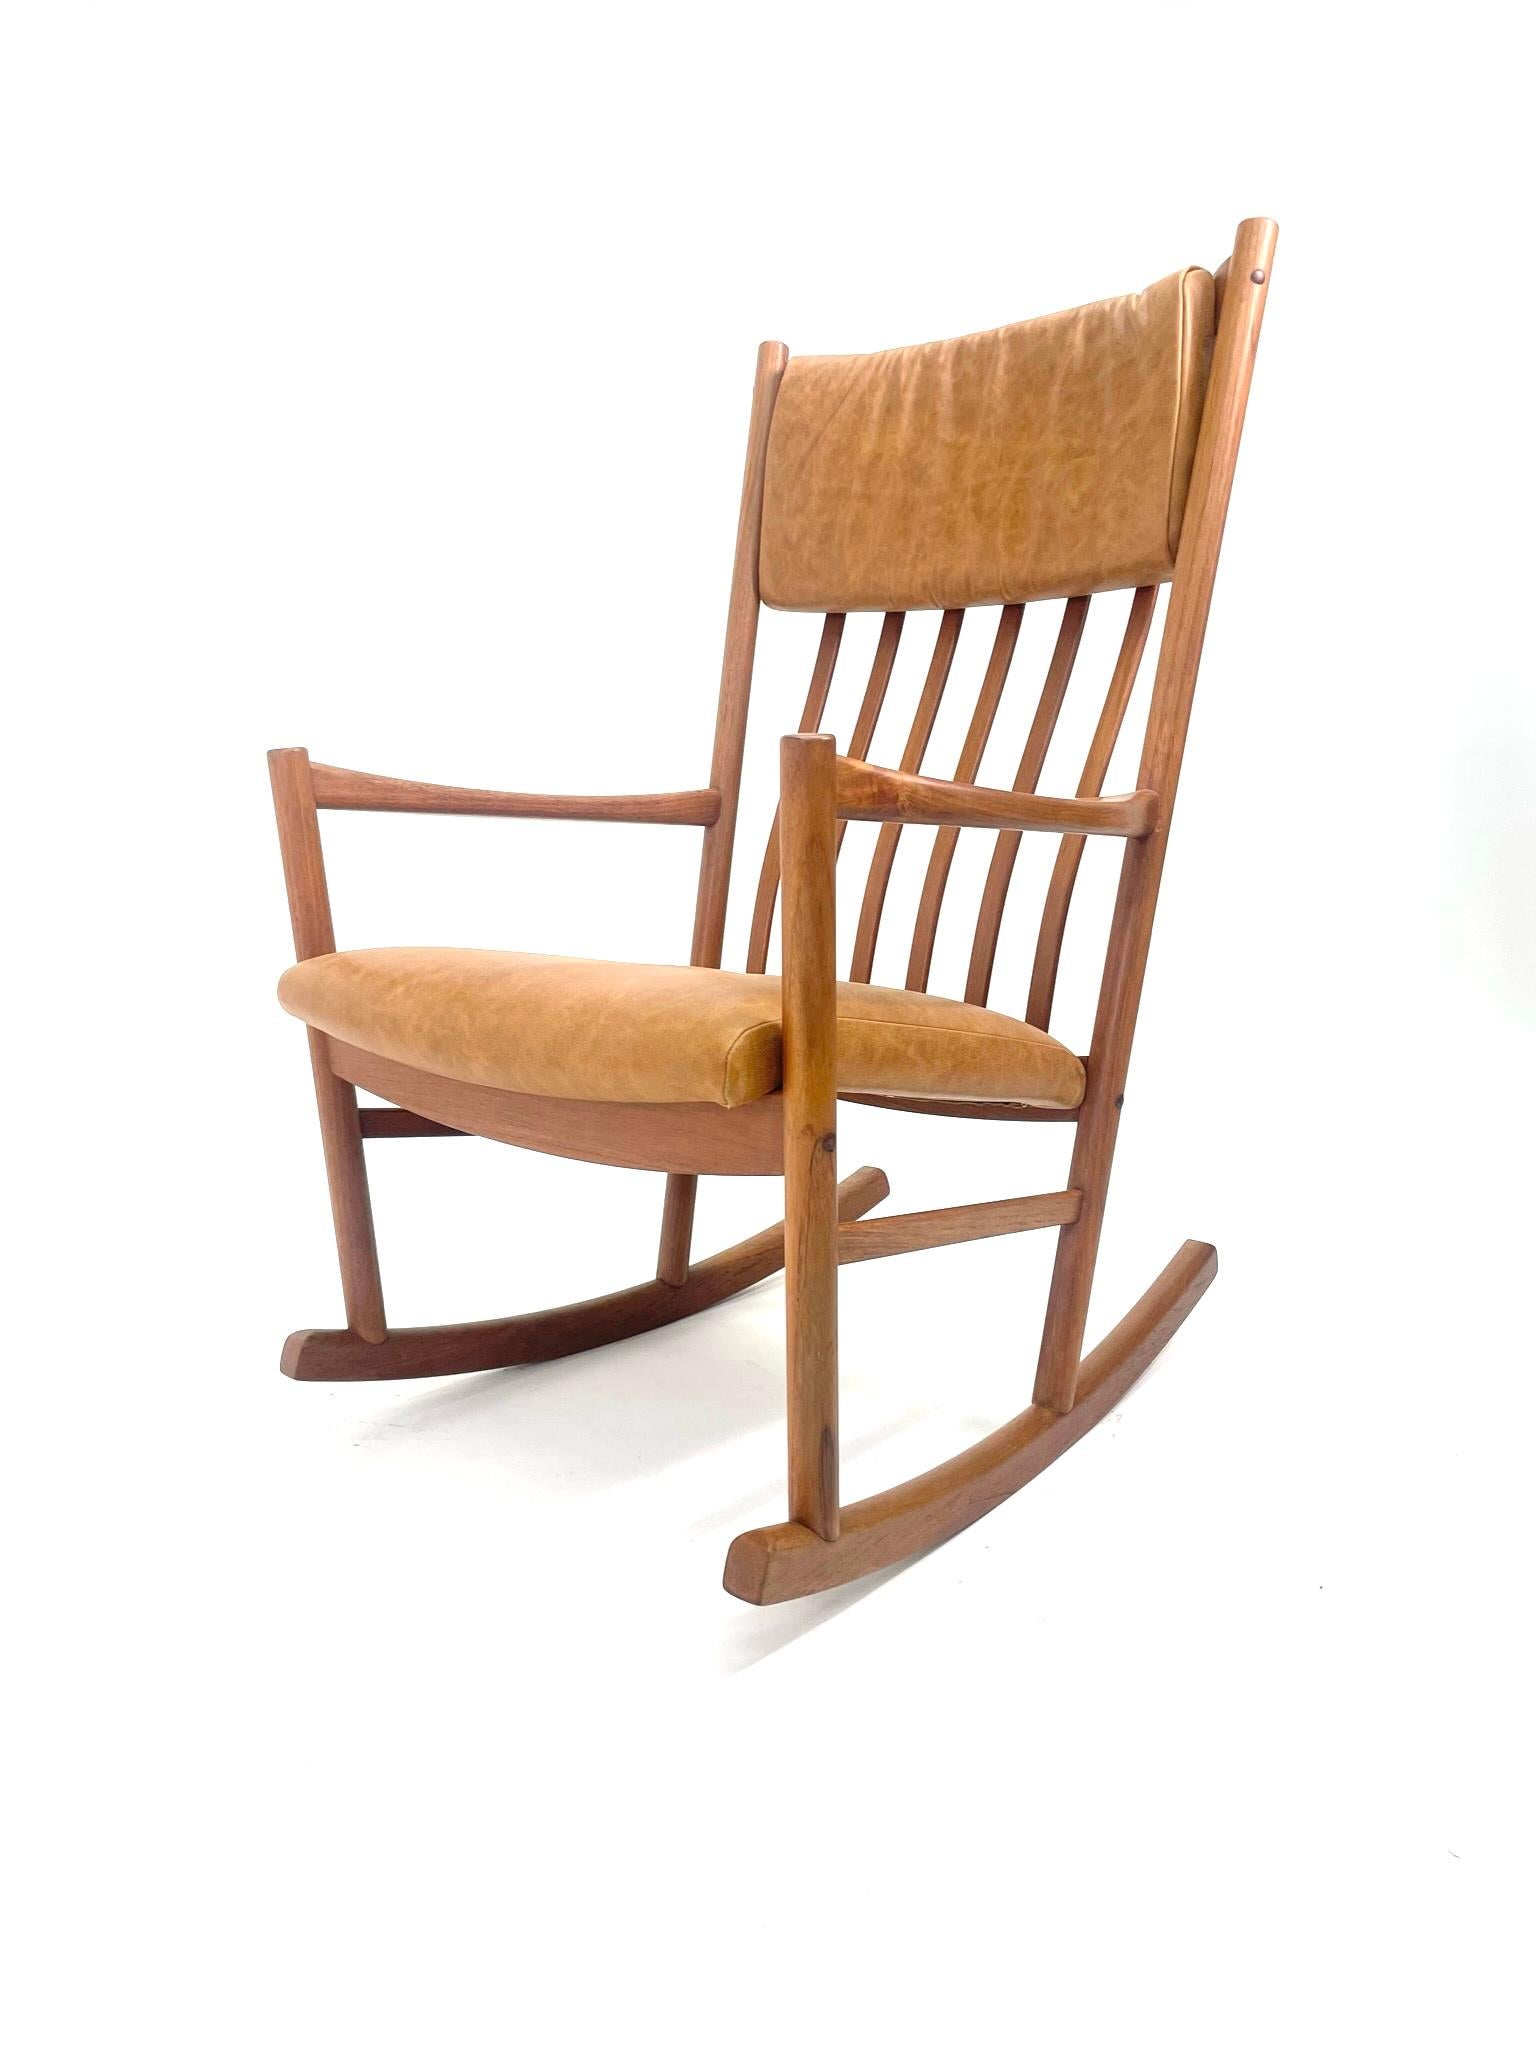 This is a beautiful Hans J. Wegner rocking chair in teak. Stunning example of Danish design with the sensually curved arms inspired by traditional Windsor and Shaker furniture, fused with Wegner’s poetic lines. This wonderful piece features a